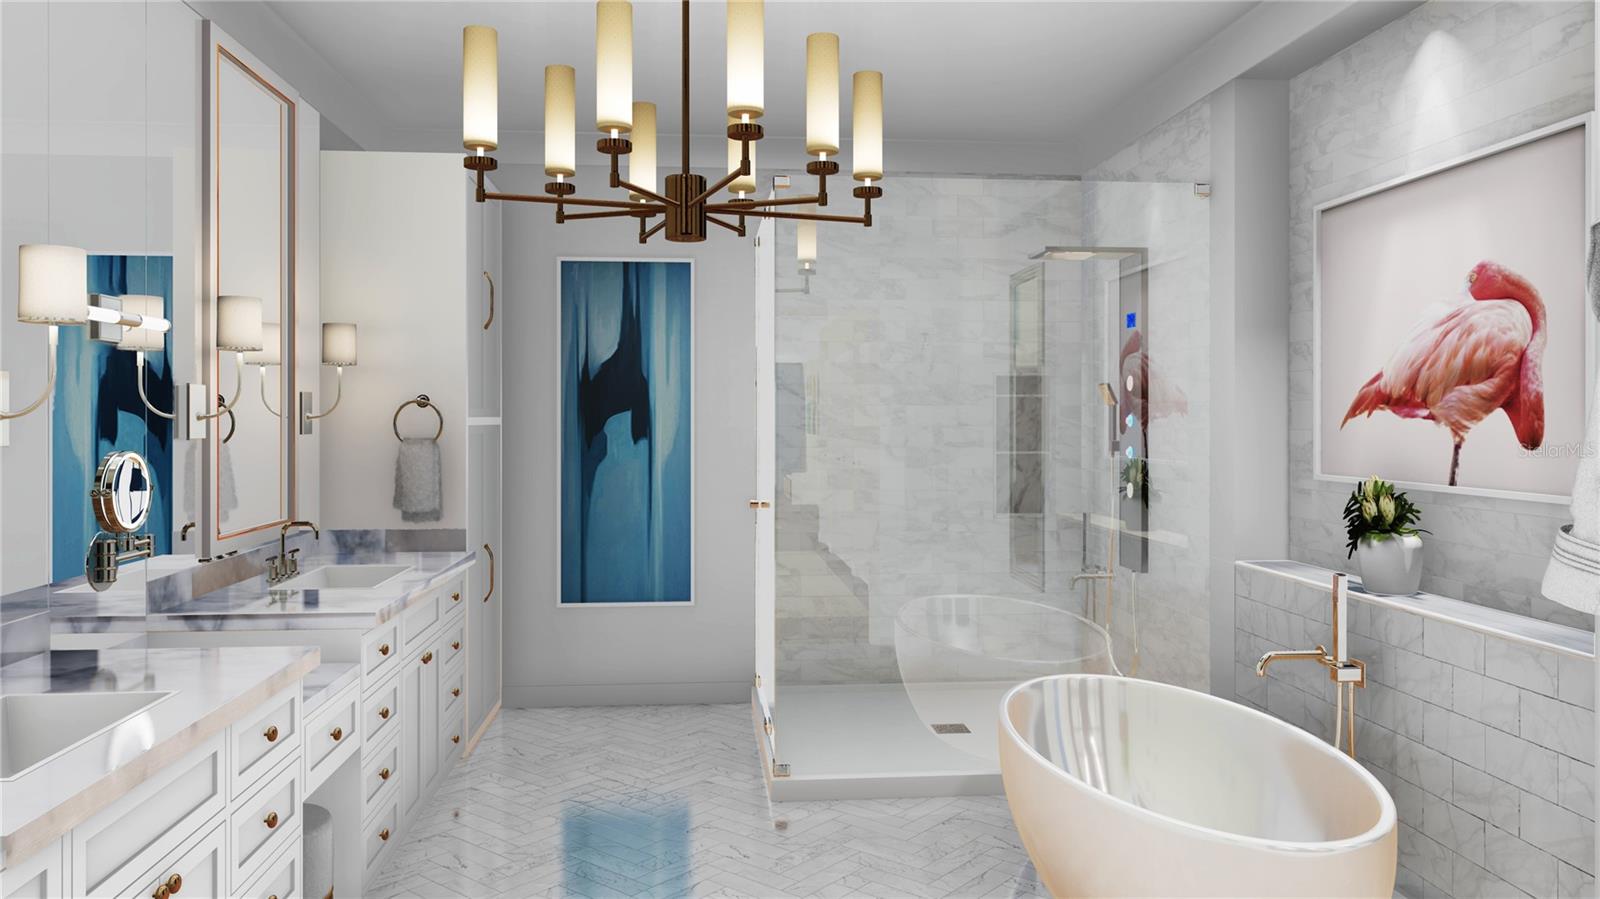 The owners bathroom is very luxurious with two sinks, a vanity, a large walk in shower and soaking tub. Digital rendering.